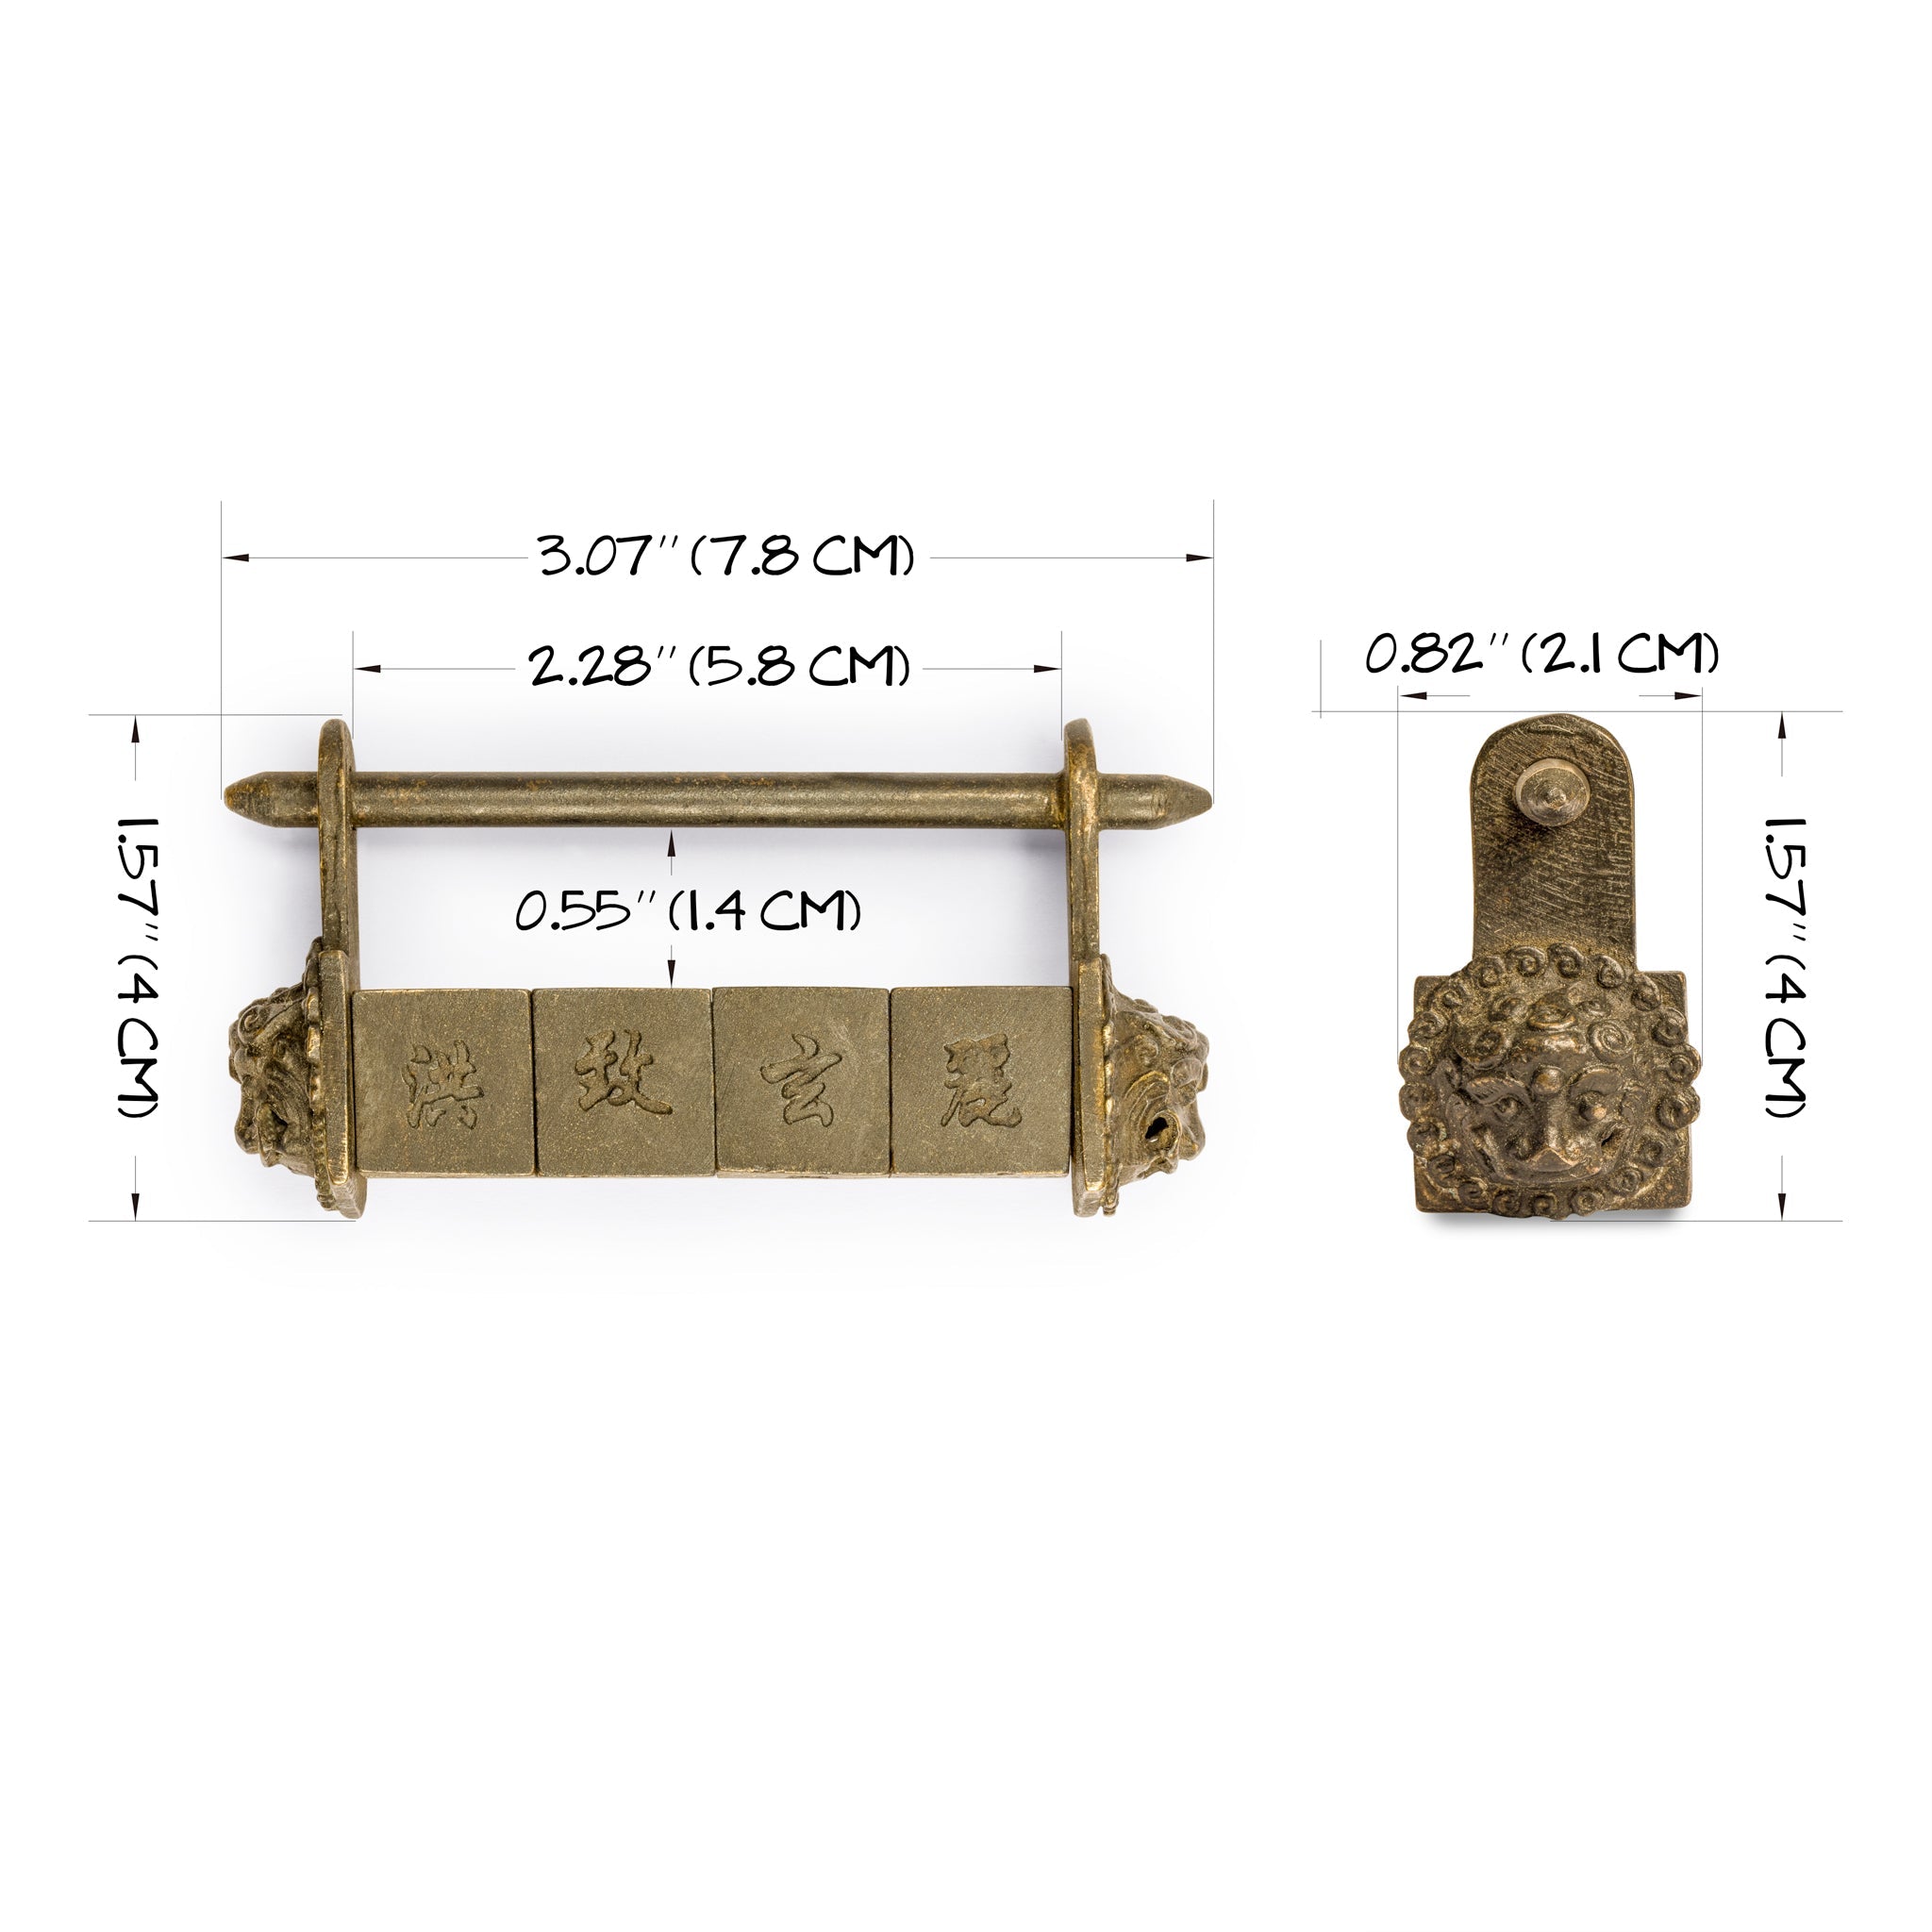 Puzzle Combination Lock 3"-Chinese Brass Hardware